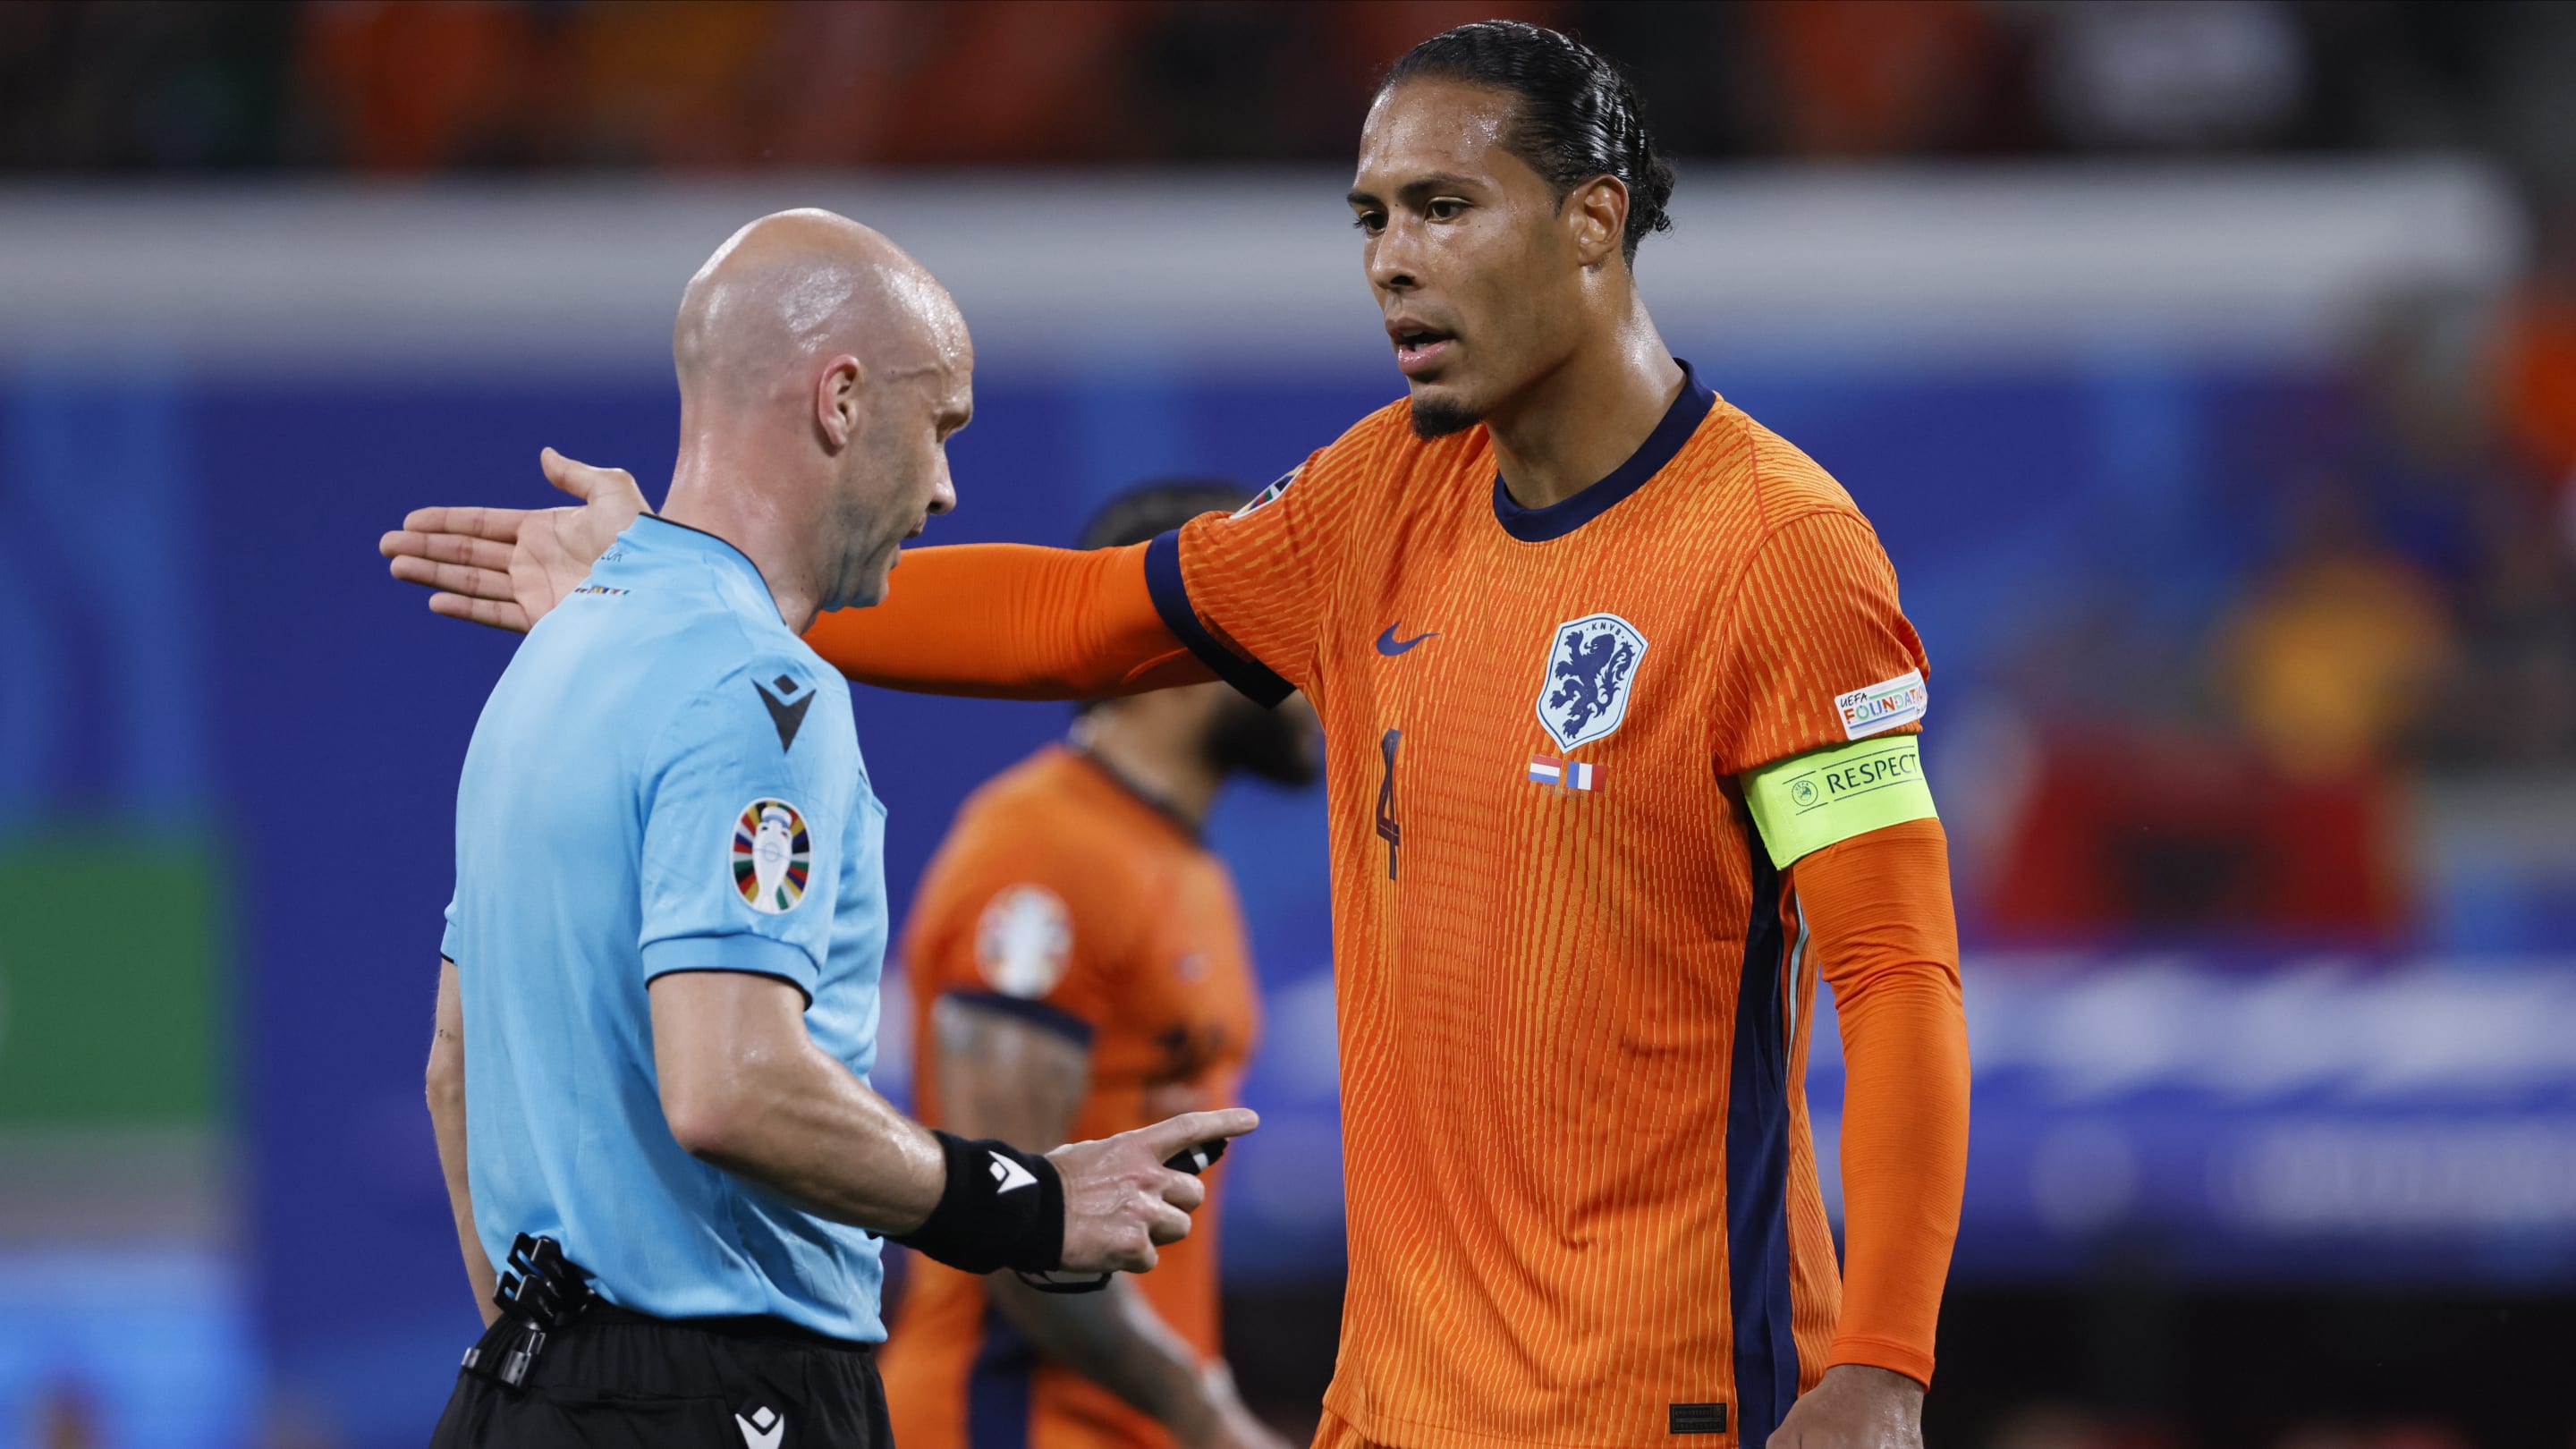 Virgil van Dijk lashes out at 'the English referee' over disallowed Netherlands goal